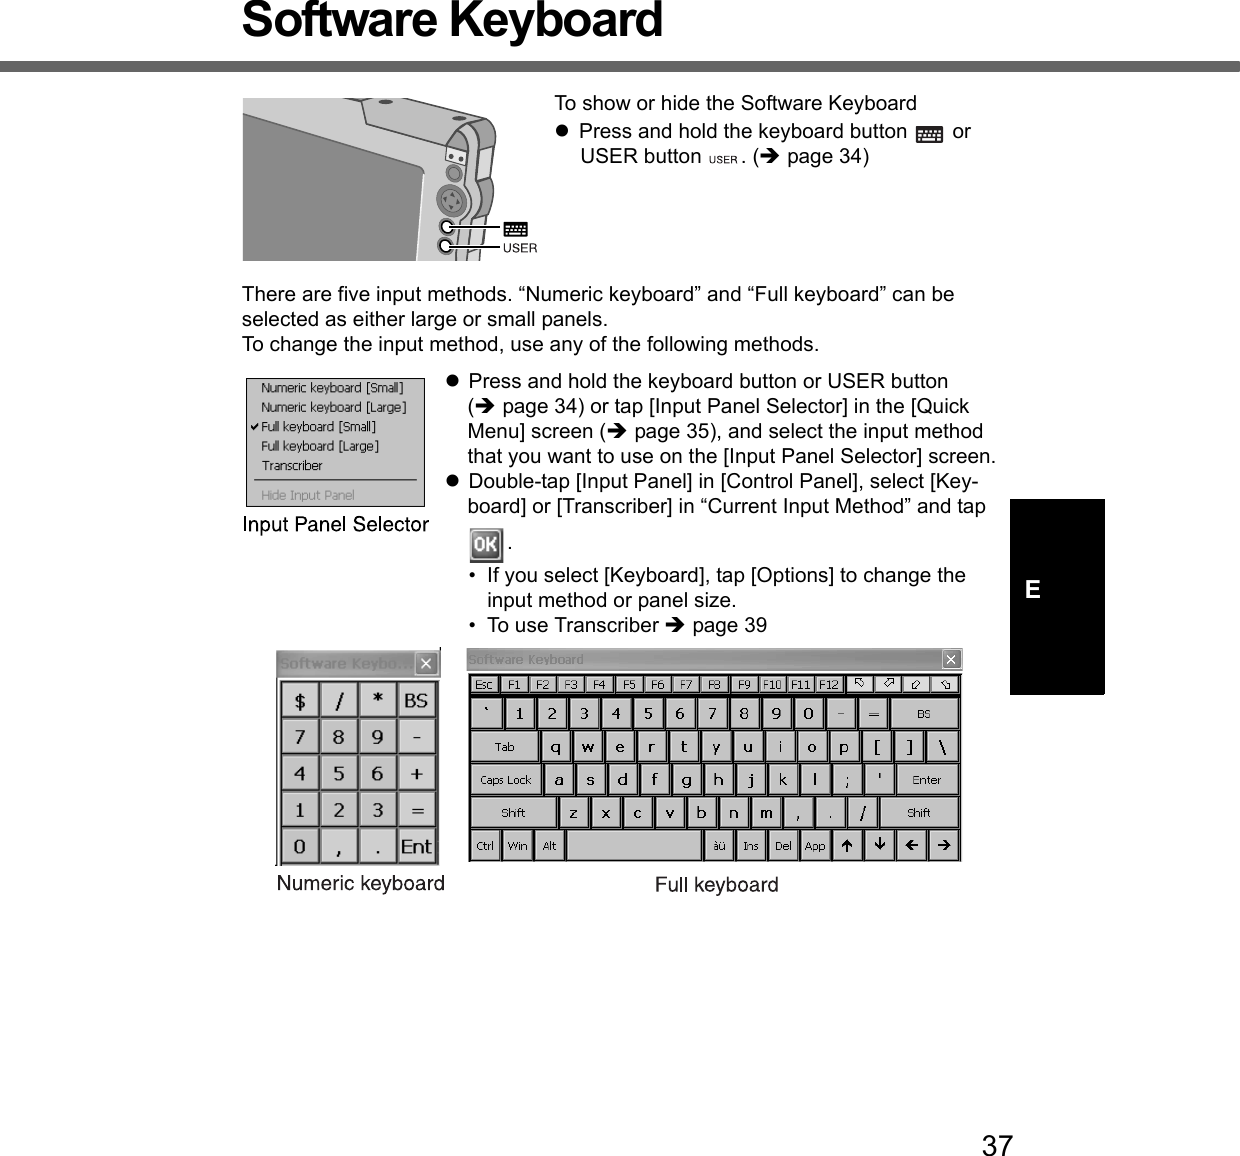 37ESoftware KeyboardTo show or hide the Software KeyboardzPress and hold the keyboard button   or USER button  . (Îpage 34)There are five input methods. “Numeric keyboard” and “Full keyboard” can be selected as either large or small panels.To change the input method, use any of the following methods.zPress and hold the keyboard button or USER button (Îpage 34) or tap [Input Panel Selector] in the [Quick Menu] screen (Îpage 35), and select the input method that you want to use on the [Input Panel Selector] screen.zDouble-tap [Input Panel] in [Control Panel], select [Key-board] or [Transcriber] in “Current Input Method” and tap .• If you select [Keyboard], tap [Options] to change the input method or panel size. • To use Transcriber Îpage 39